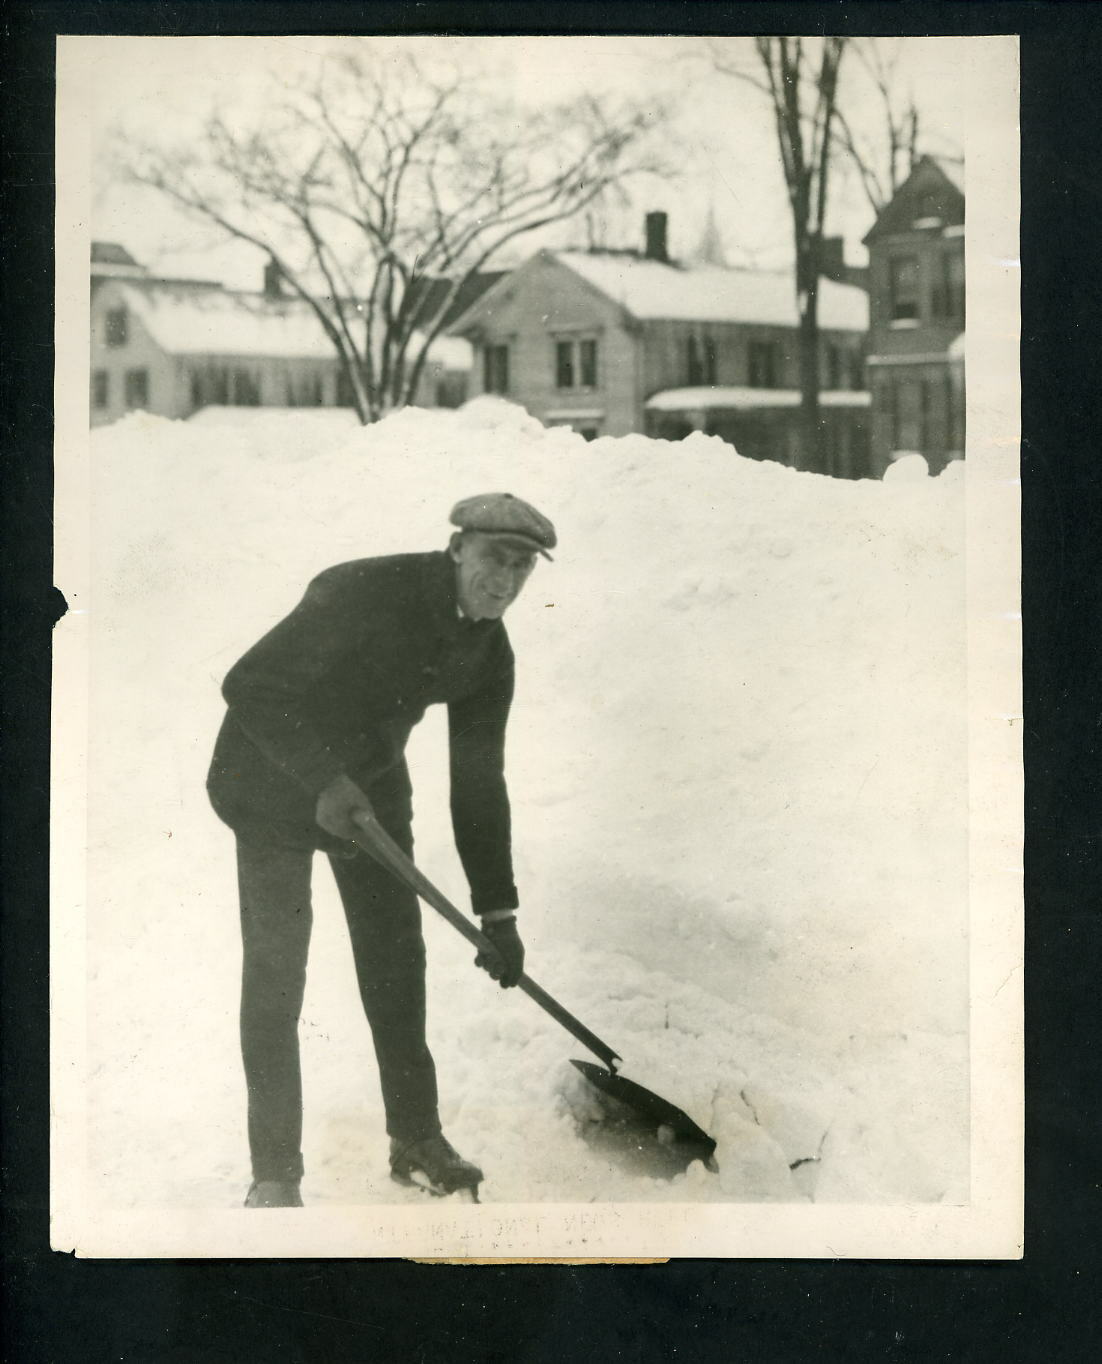 Shano Collins shoveling snow circa 1920's Type 1 Press Photo Poster painting Boston Red Sox